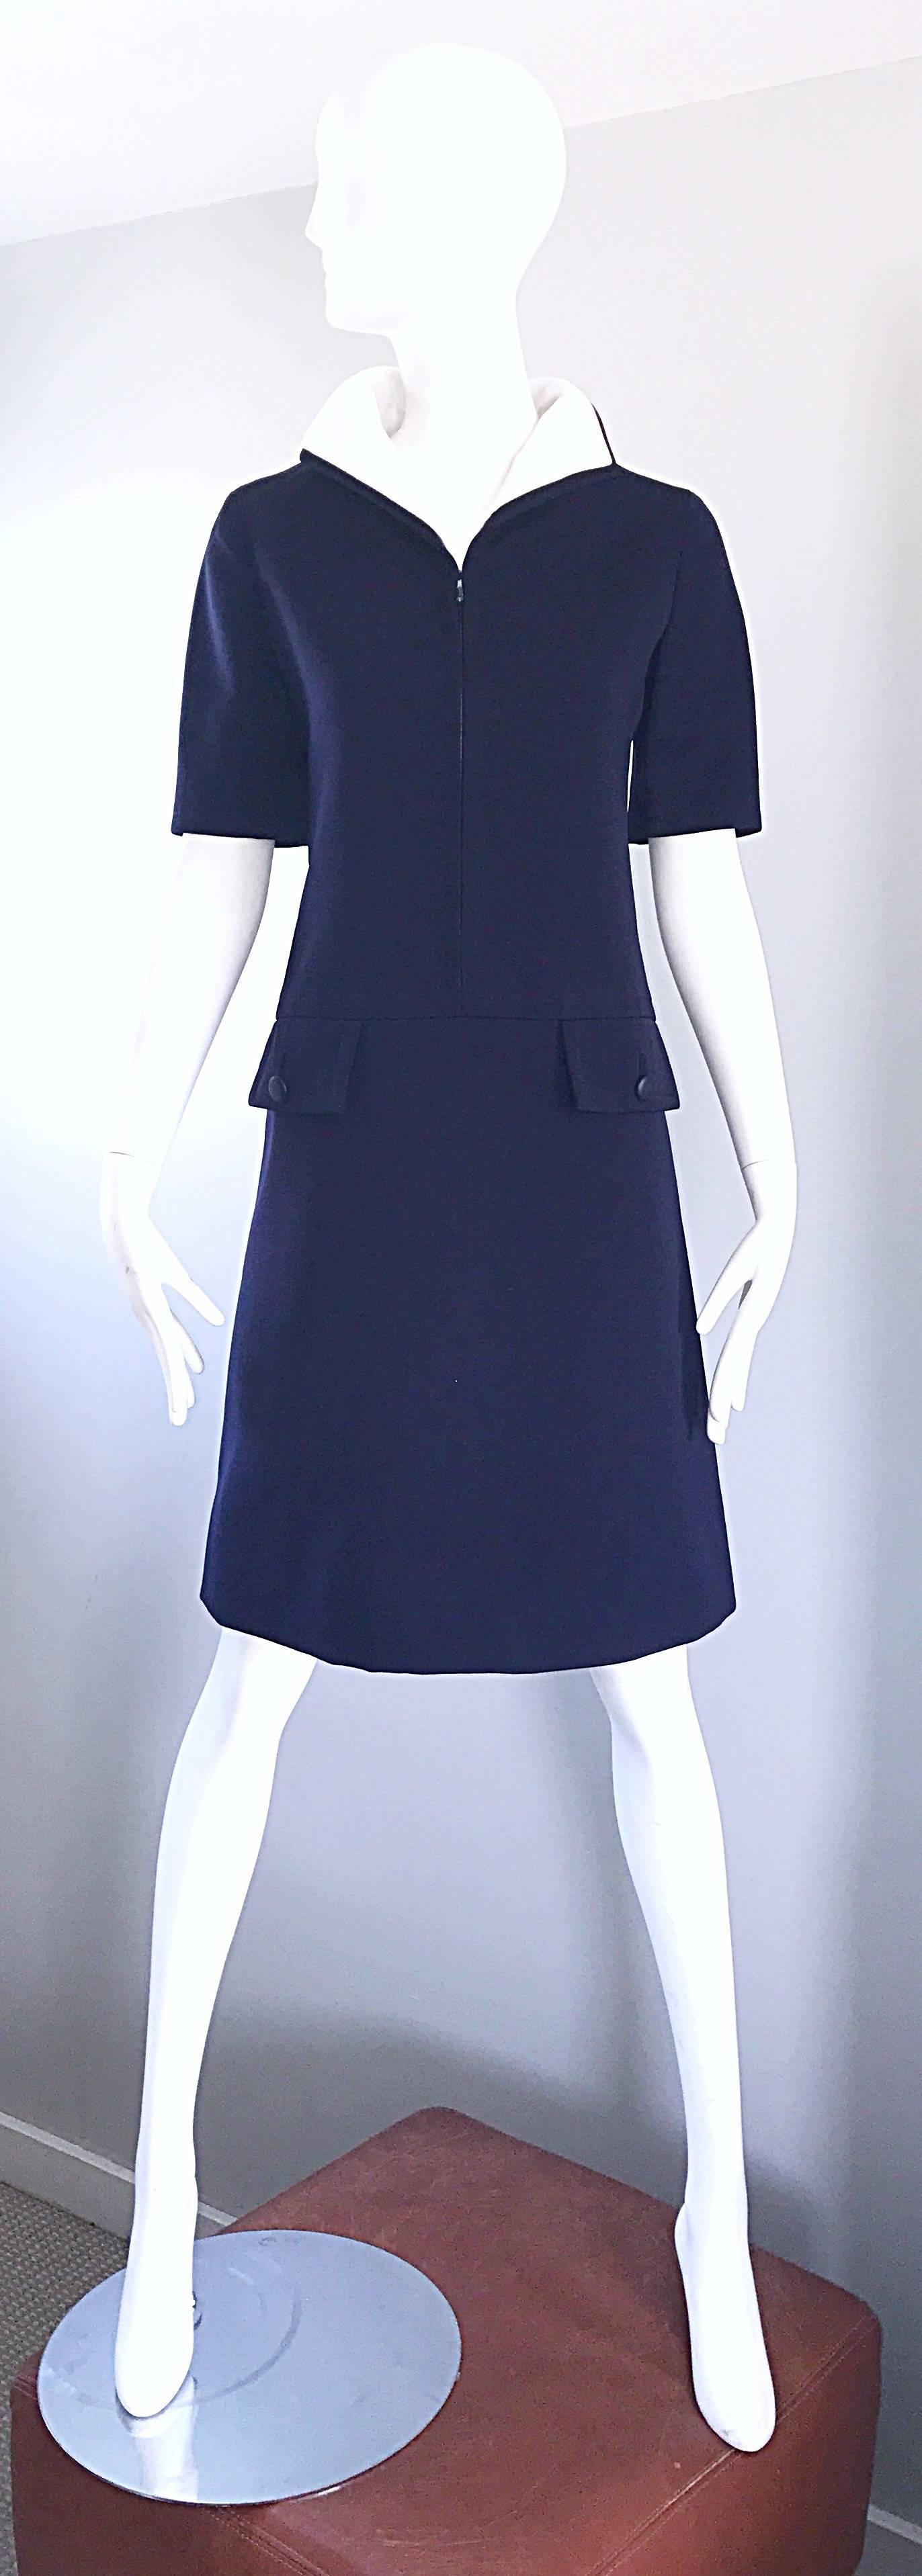 Amazing and rare vintage 1960s YVES SAINT LAURENT HAUTE COUTURE navy blue and white numbered nautical A-Line dress! 1960s YSL pieces are hard enough to find, yet alone an haute couture piece! As with all genuine haute couture pieces, this gem is